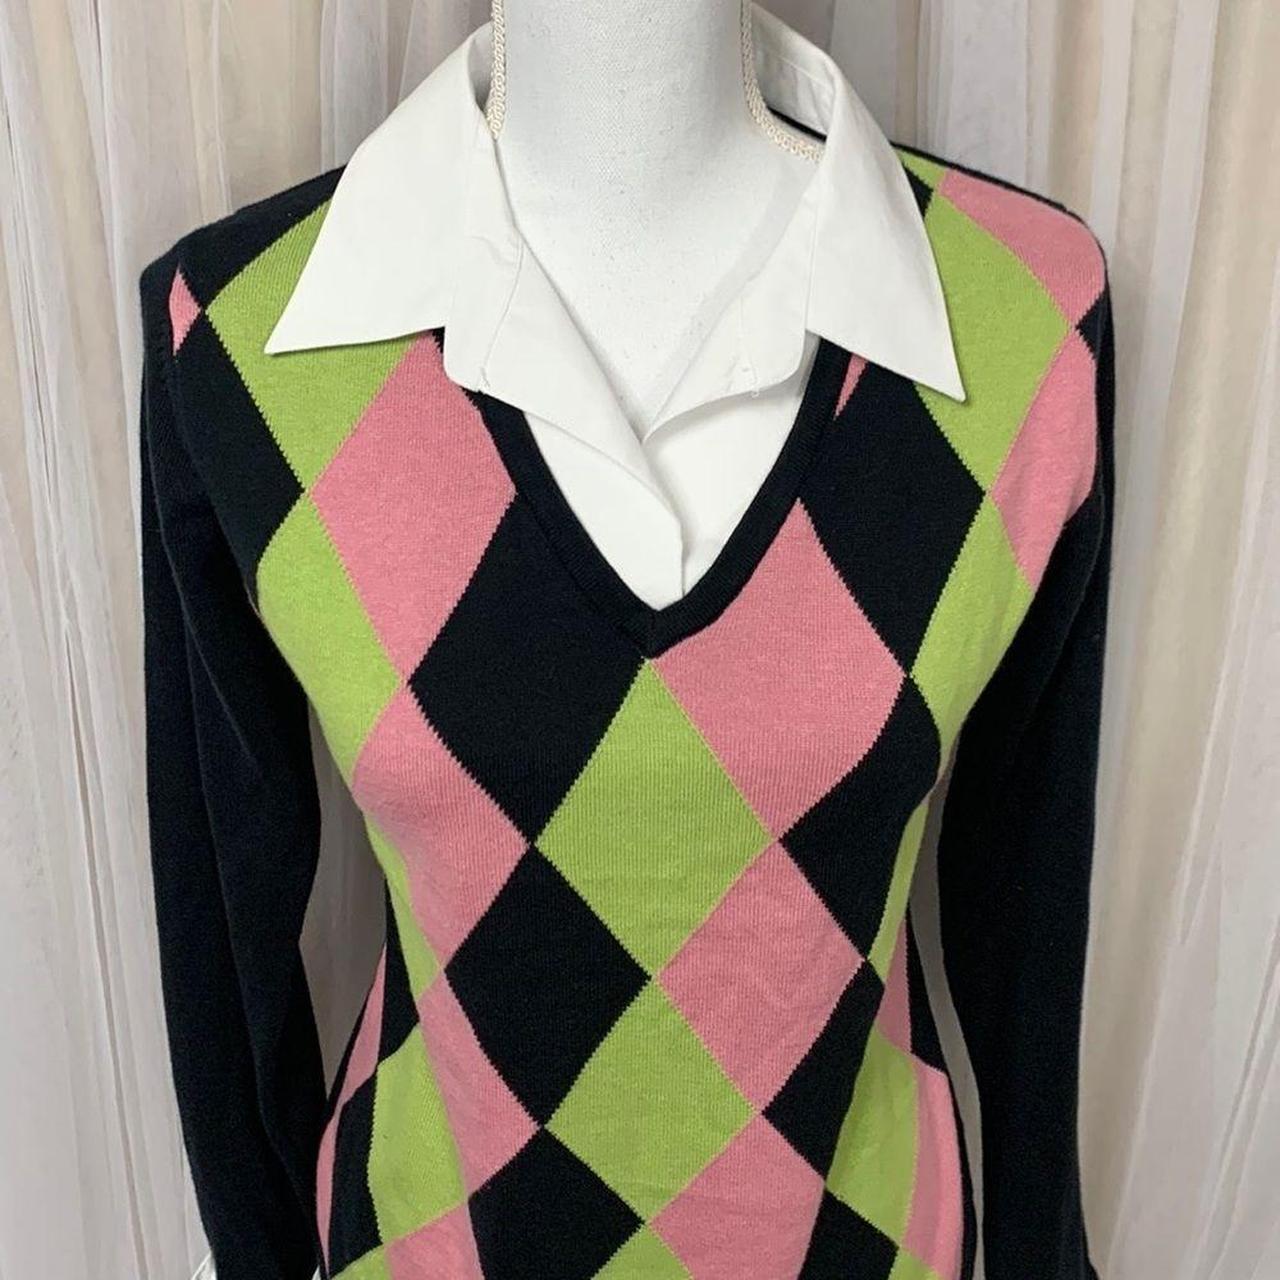 Product Image 2 - Notations black green pink argyle